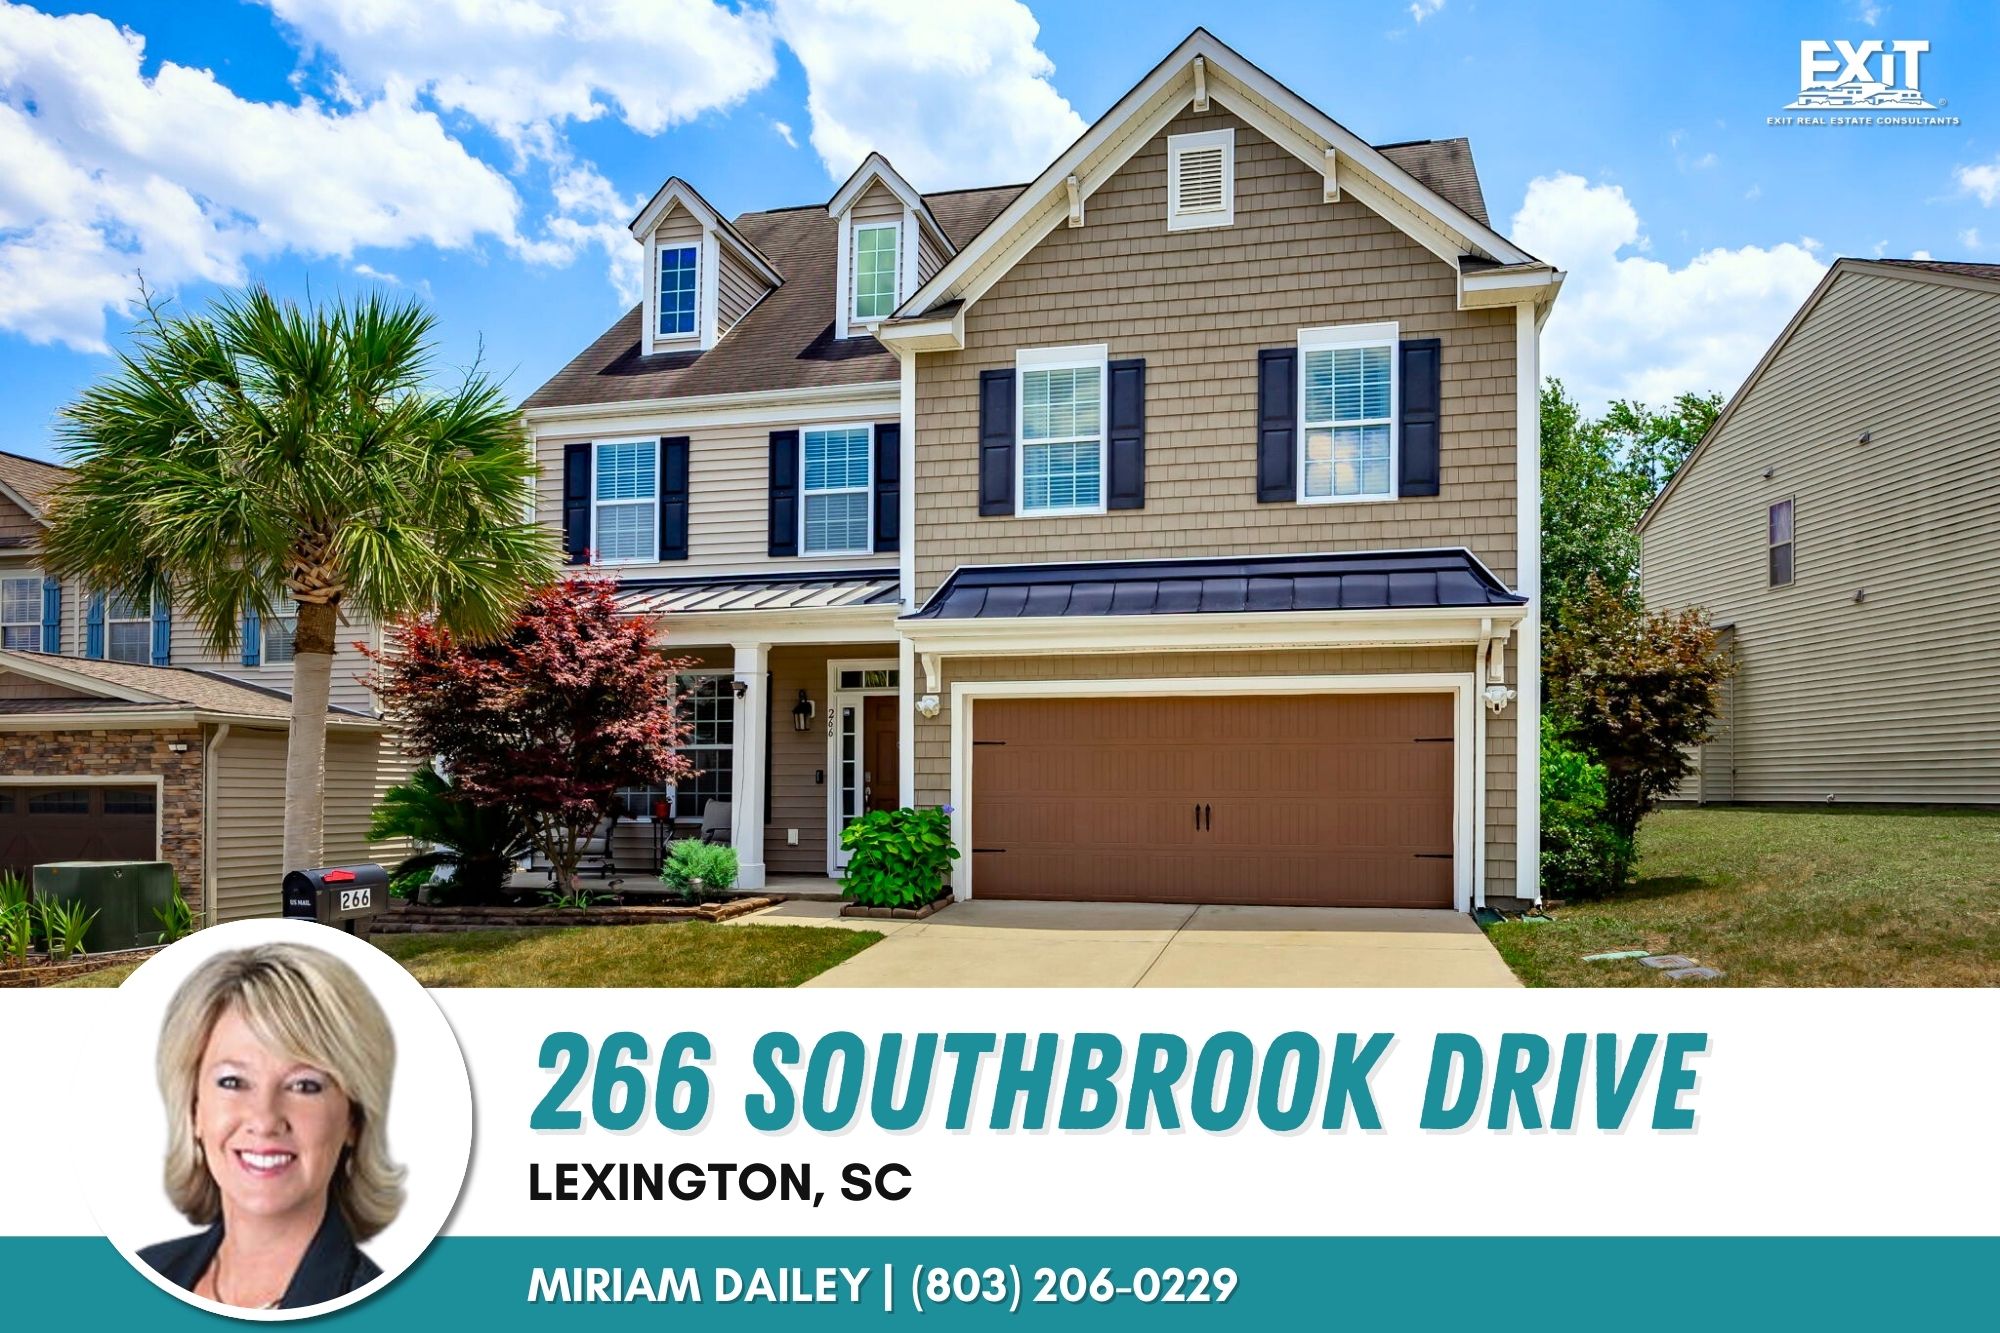 Just listed in South Brook